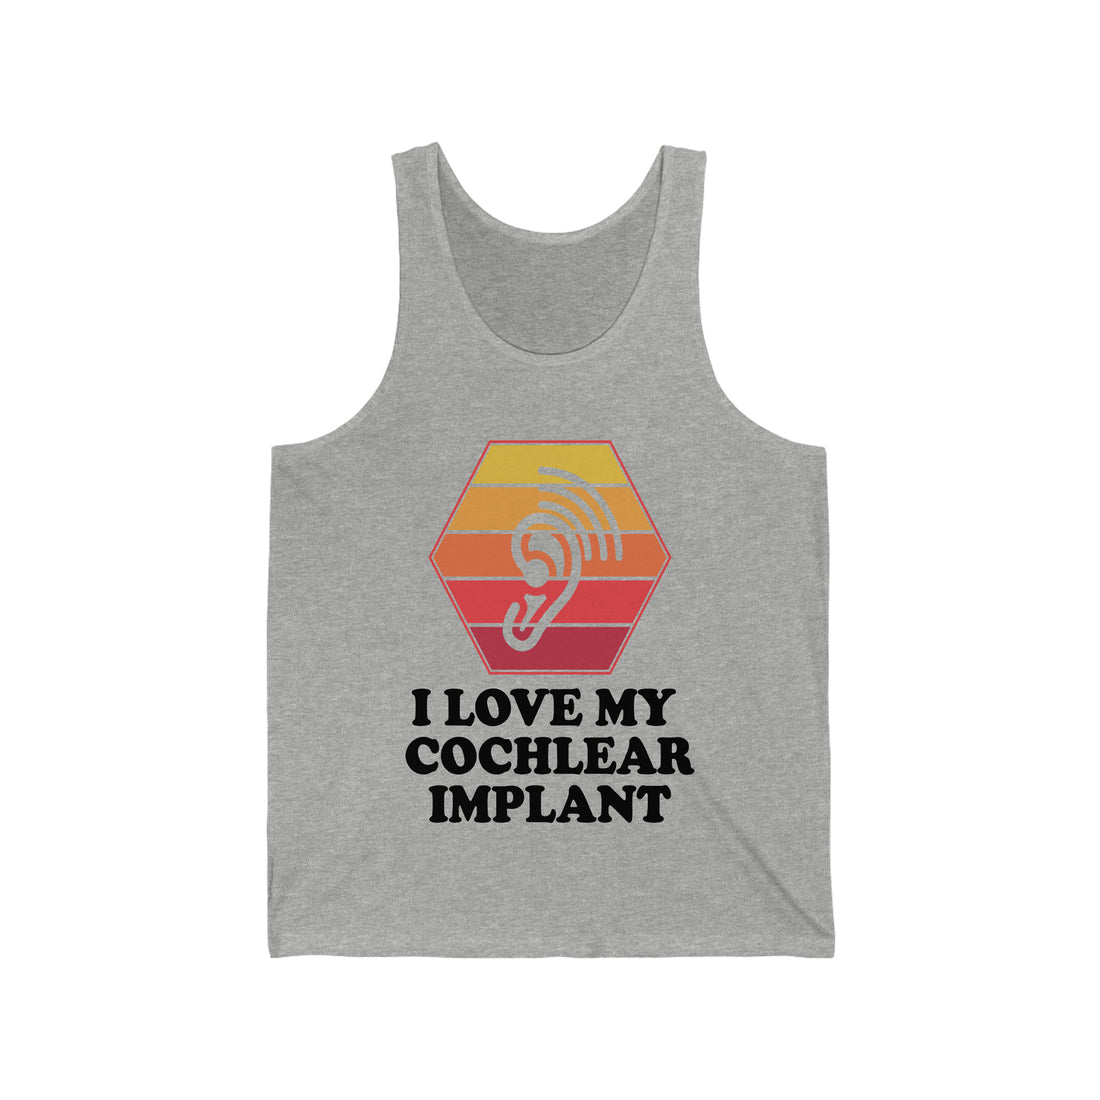 I Love My Cochlear Implant - Unisex Jersey Tank Top